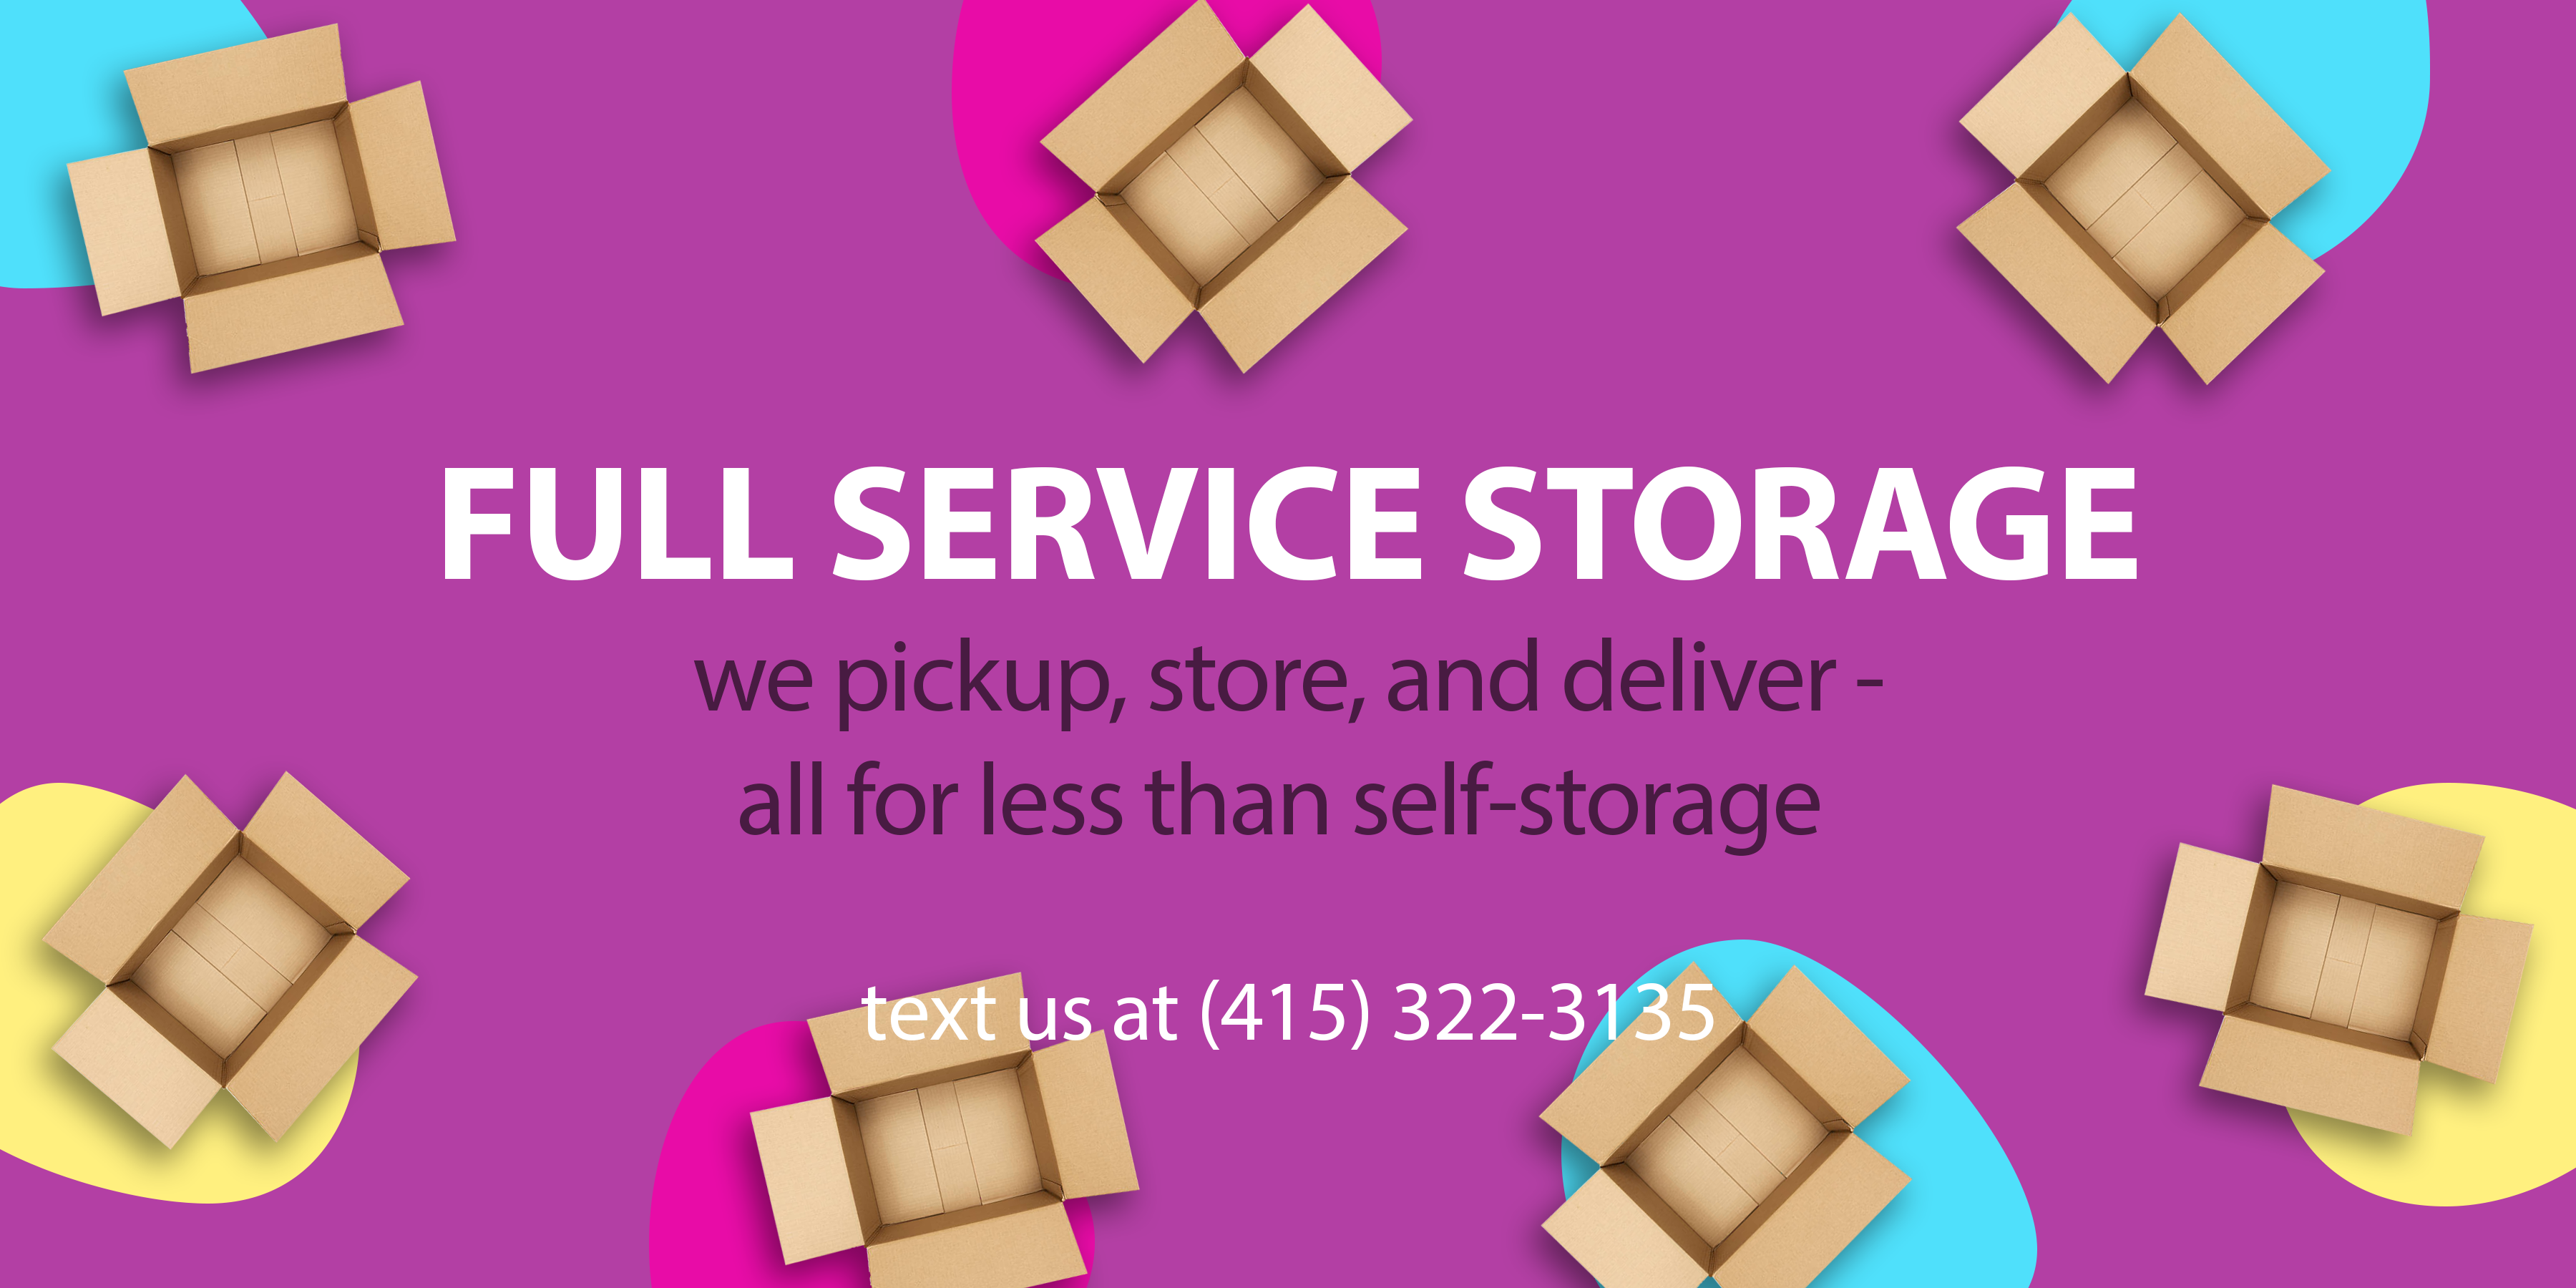 Looking for a moving & storage service company in the San Francisco Bay